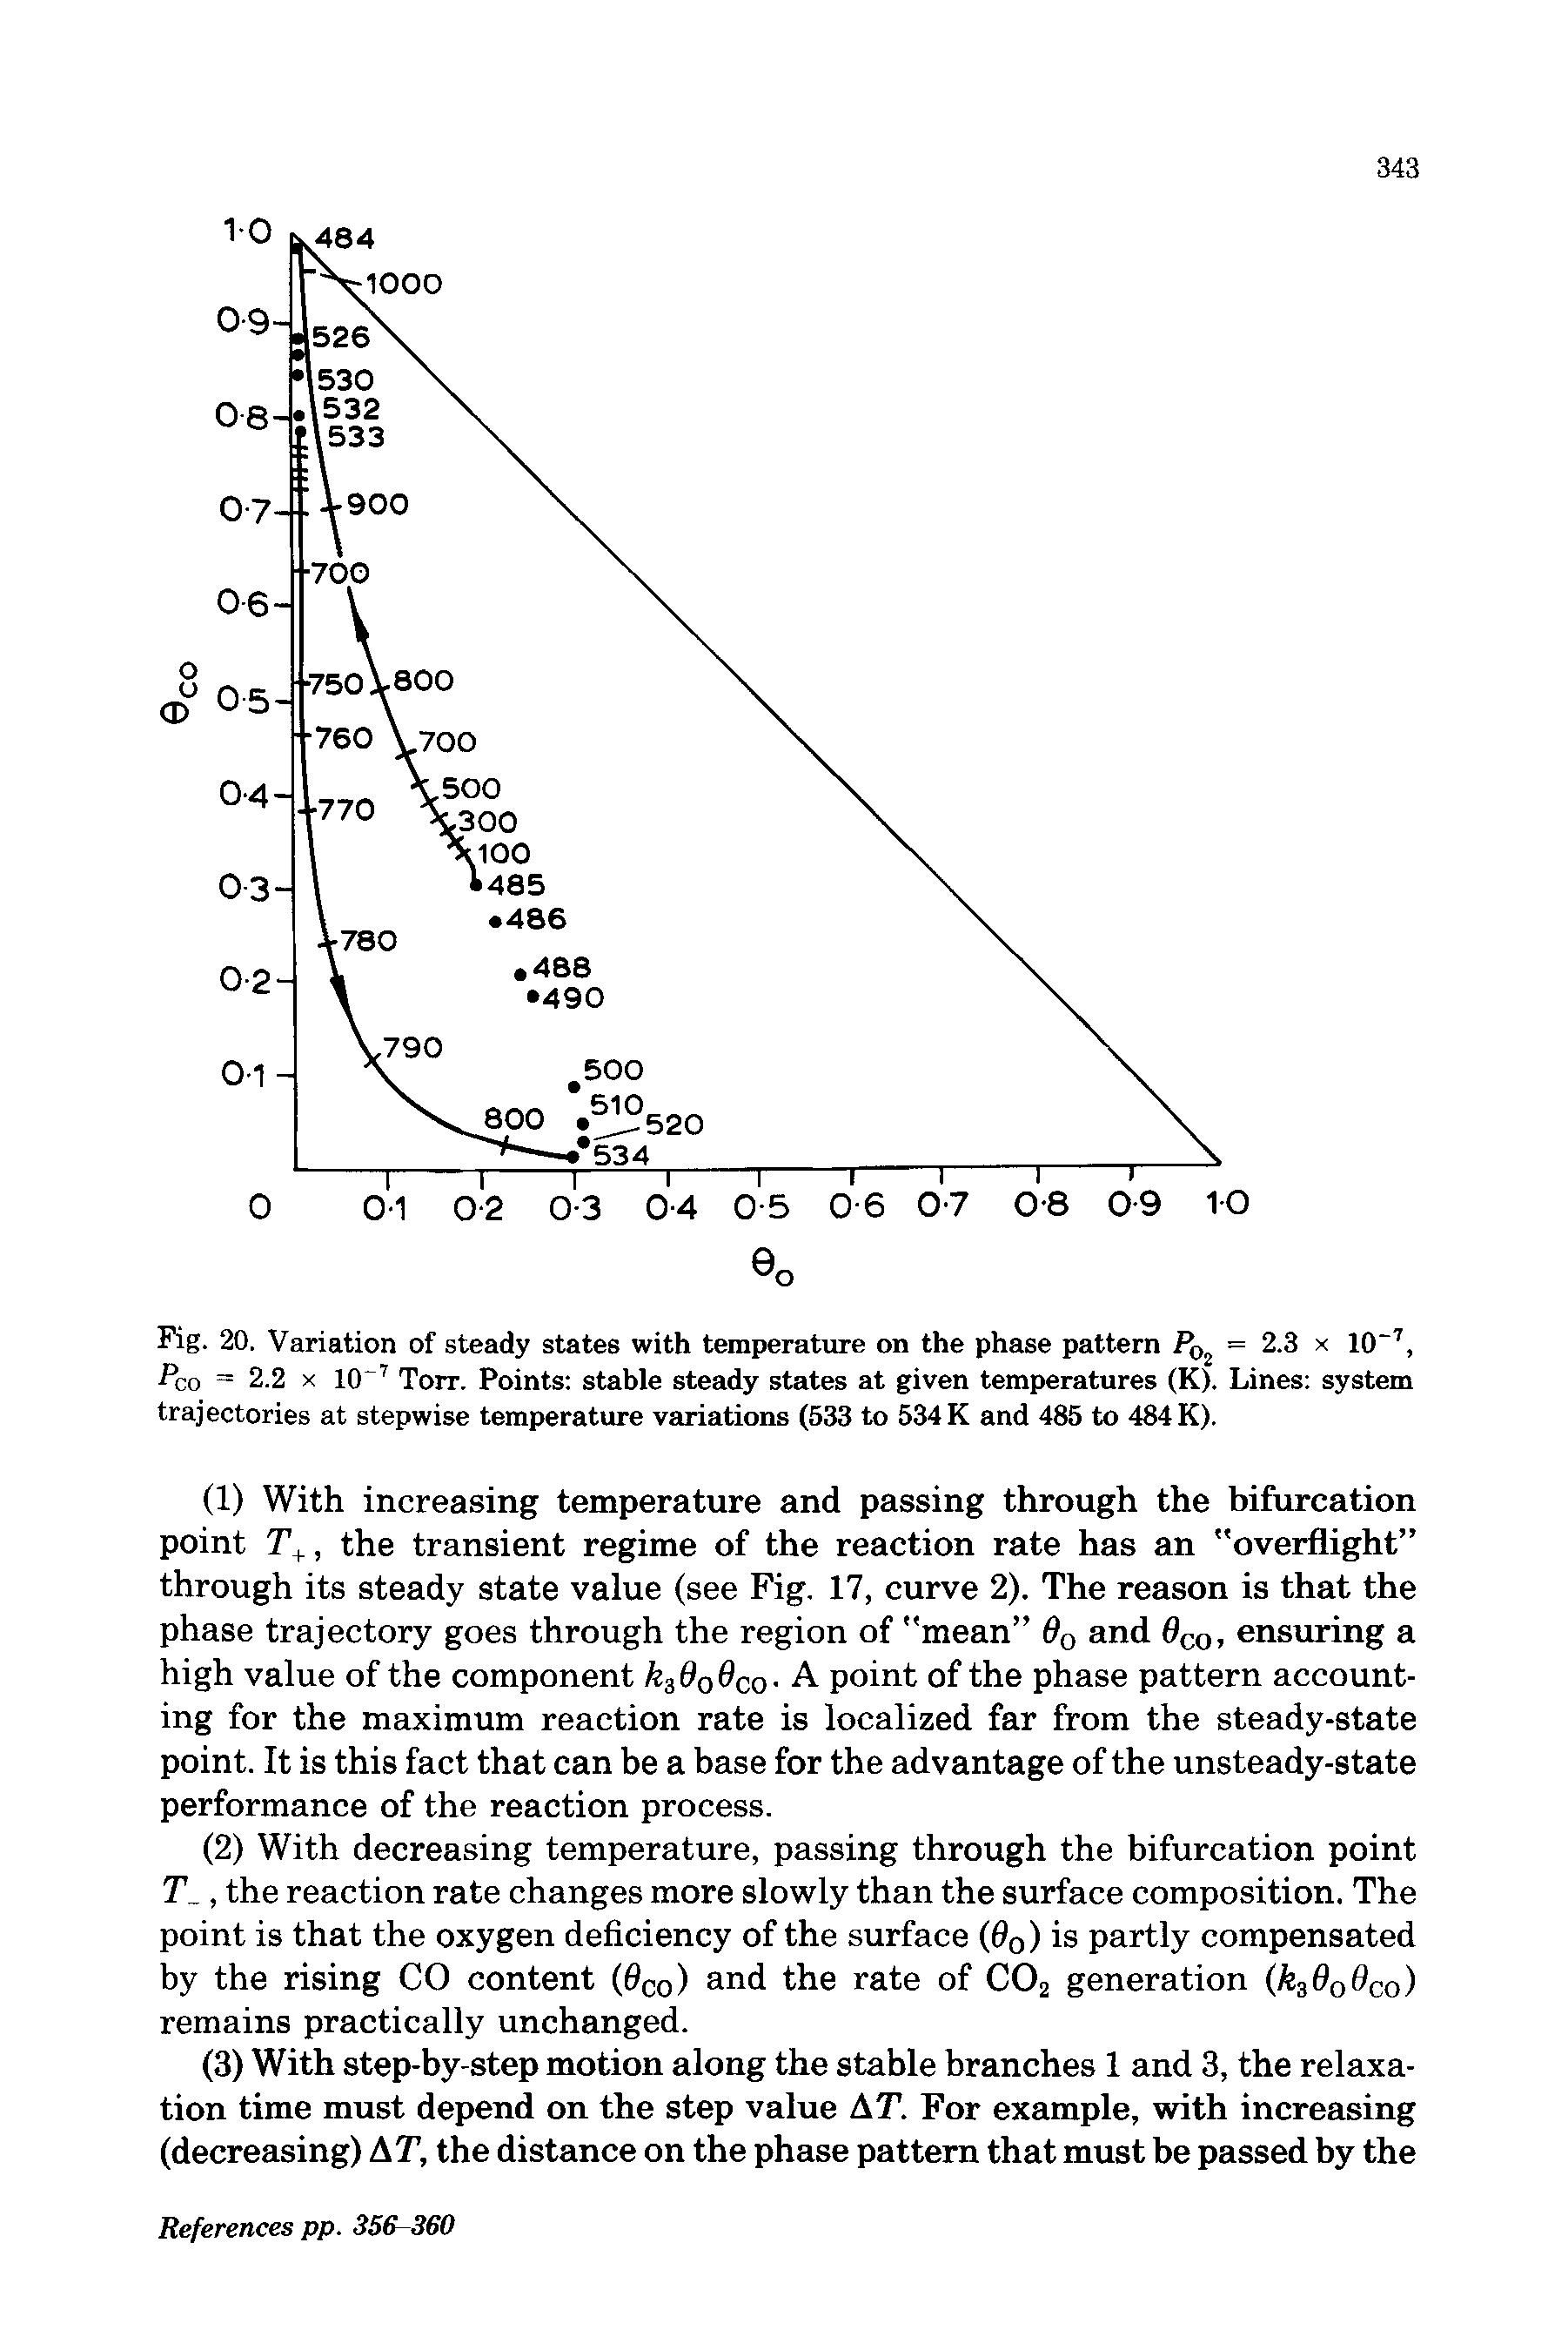 Fig. 20. Variation of steady states with temperature on the phase pattern Pq2 = 2.3 x 10 7, Fco = 2.2 x 10 7 Torr. Points stable steady states at given temperatures (K). Lines system trajectories at stepwise temperature variations (533 to 534K and 485 to 484K).